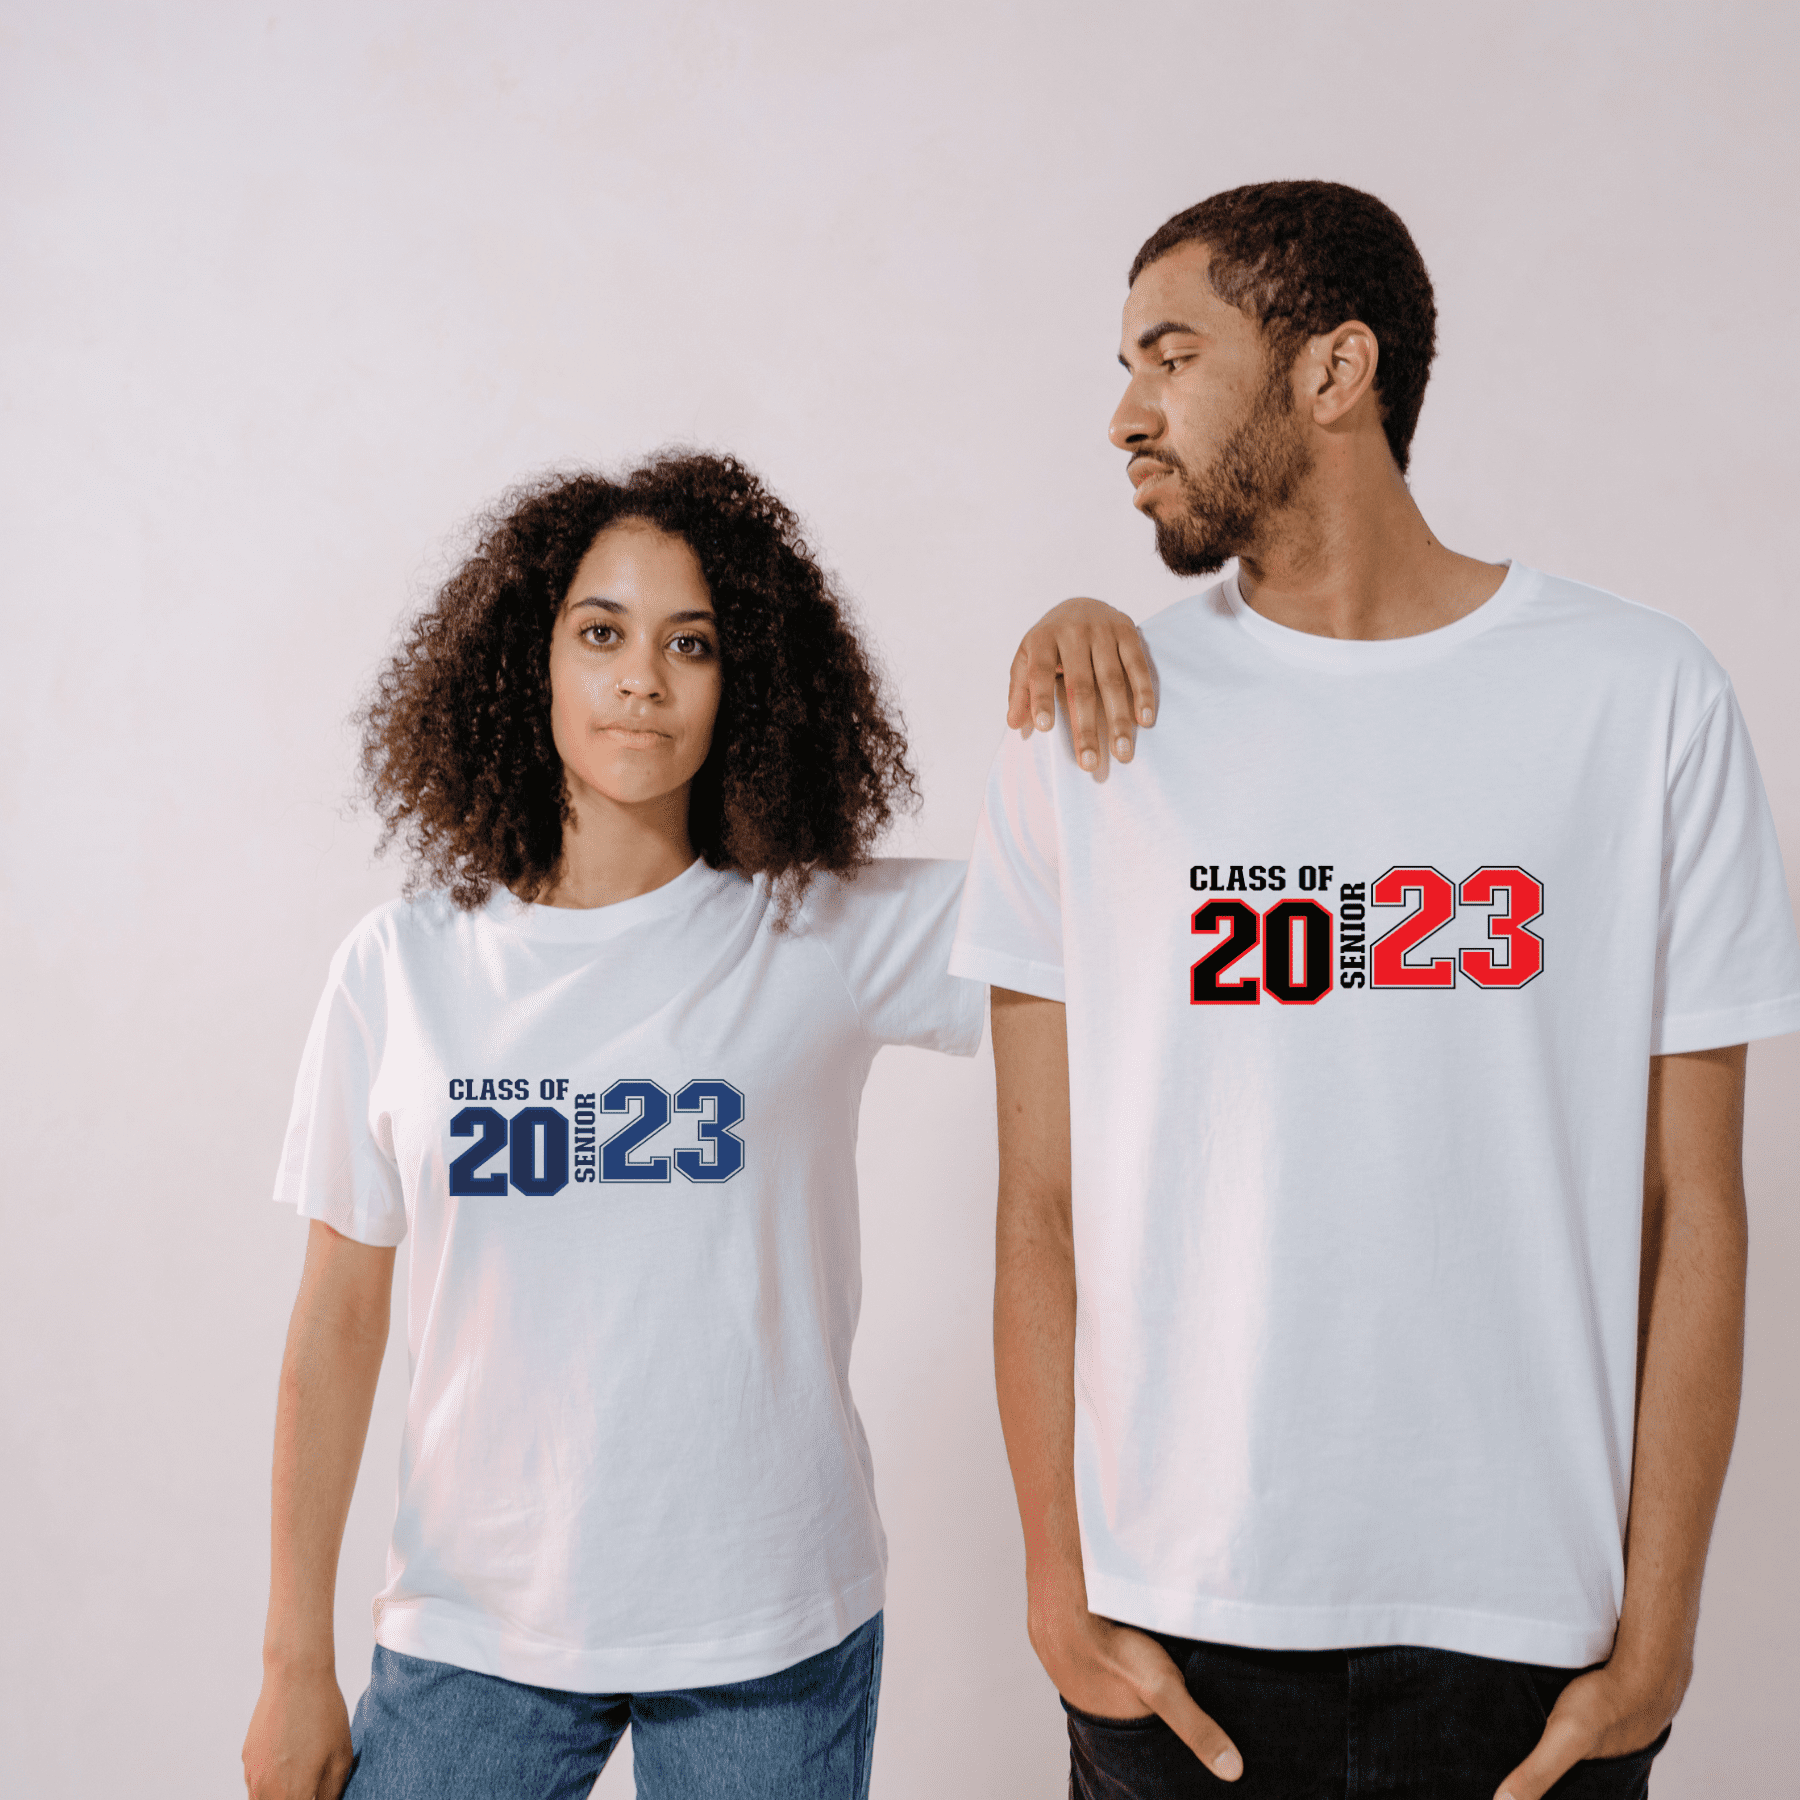 T shirt transfers that say Class of 2023 in change able colors